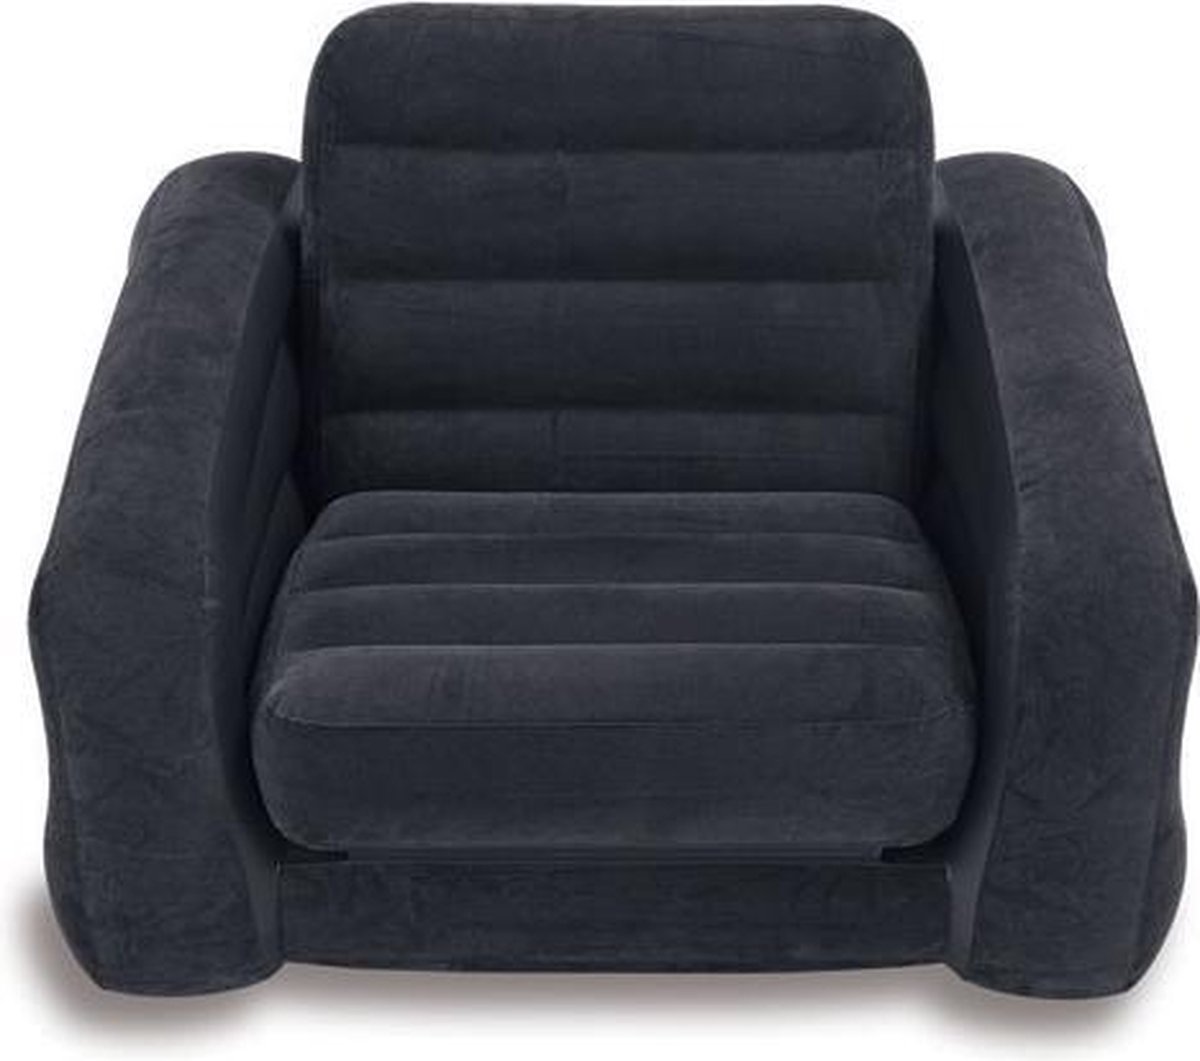 Intex Pull-Out Chair Opblaasbare Stoel/Luchtbed - 1-persoons - 221x107x66 cm